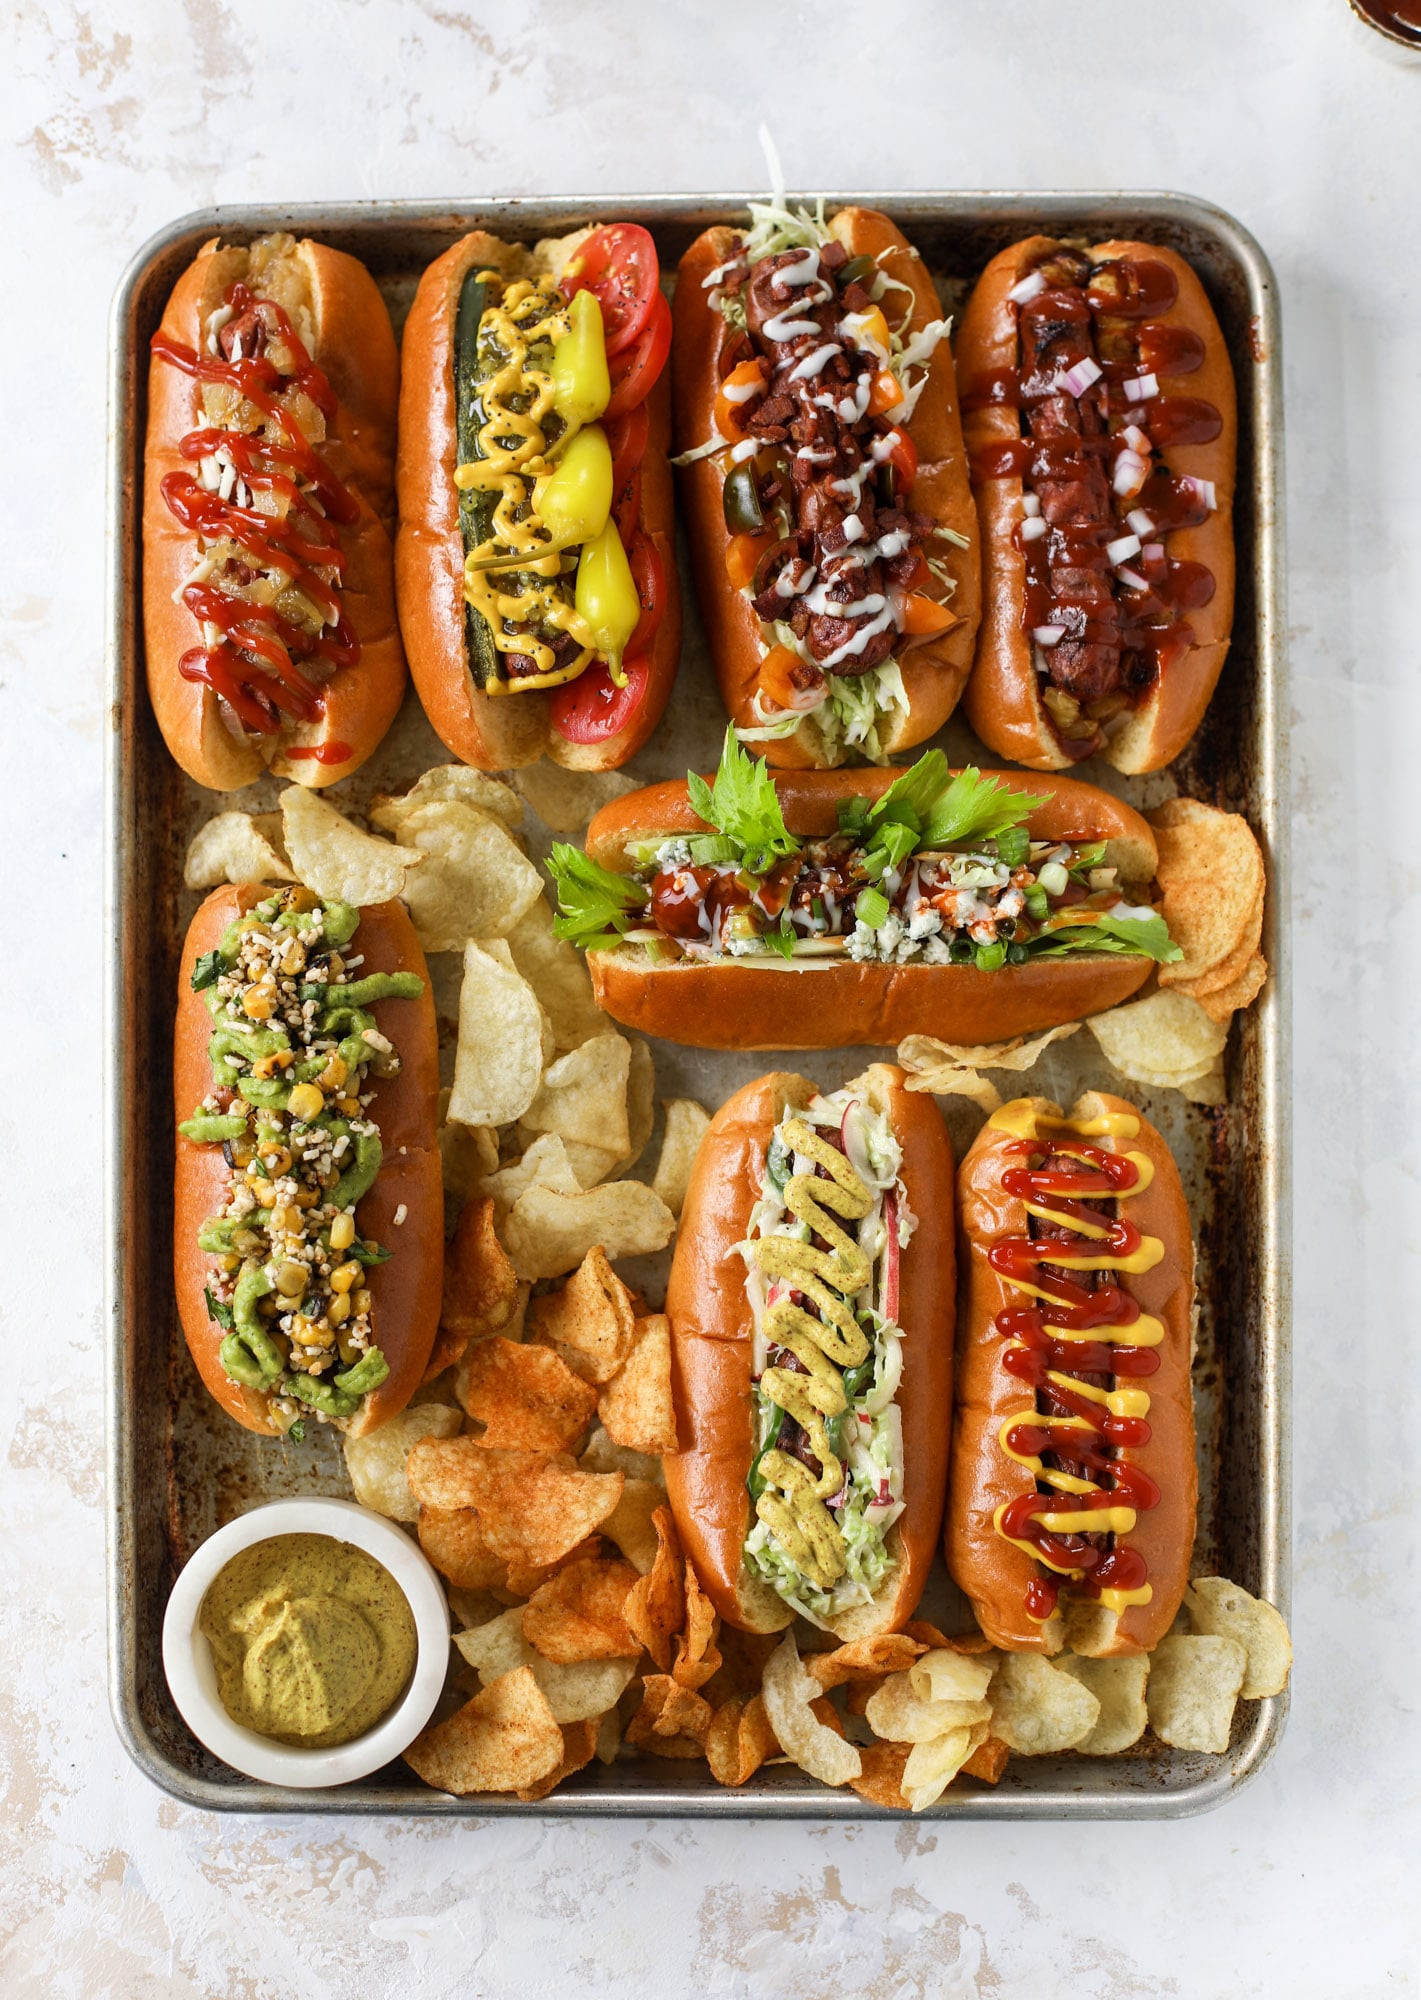 Franks Gourmet Hot Dogs
 Hot Dog Bar How to Make a Hot Dog Bar 8 Fancy Hot Dogs